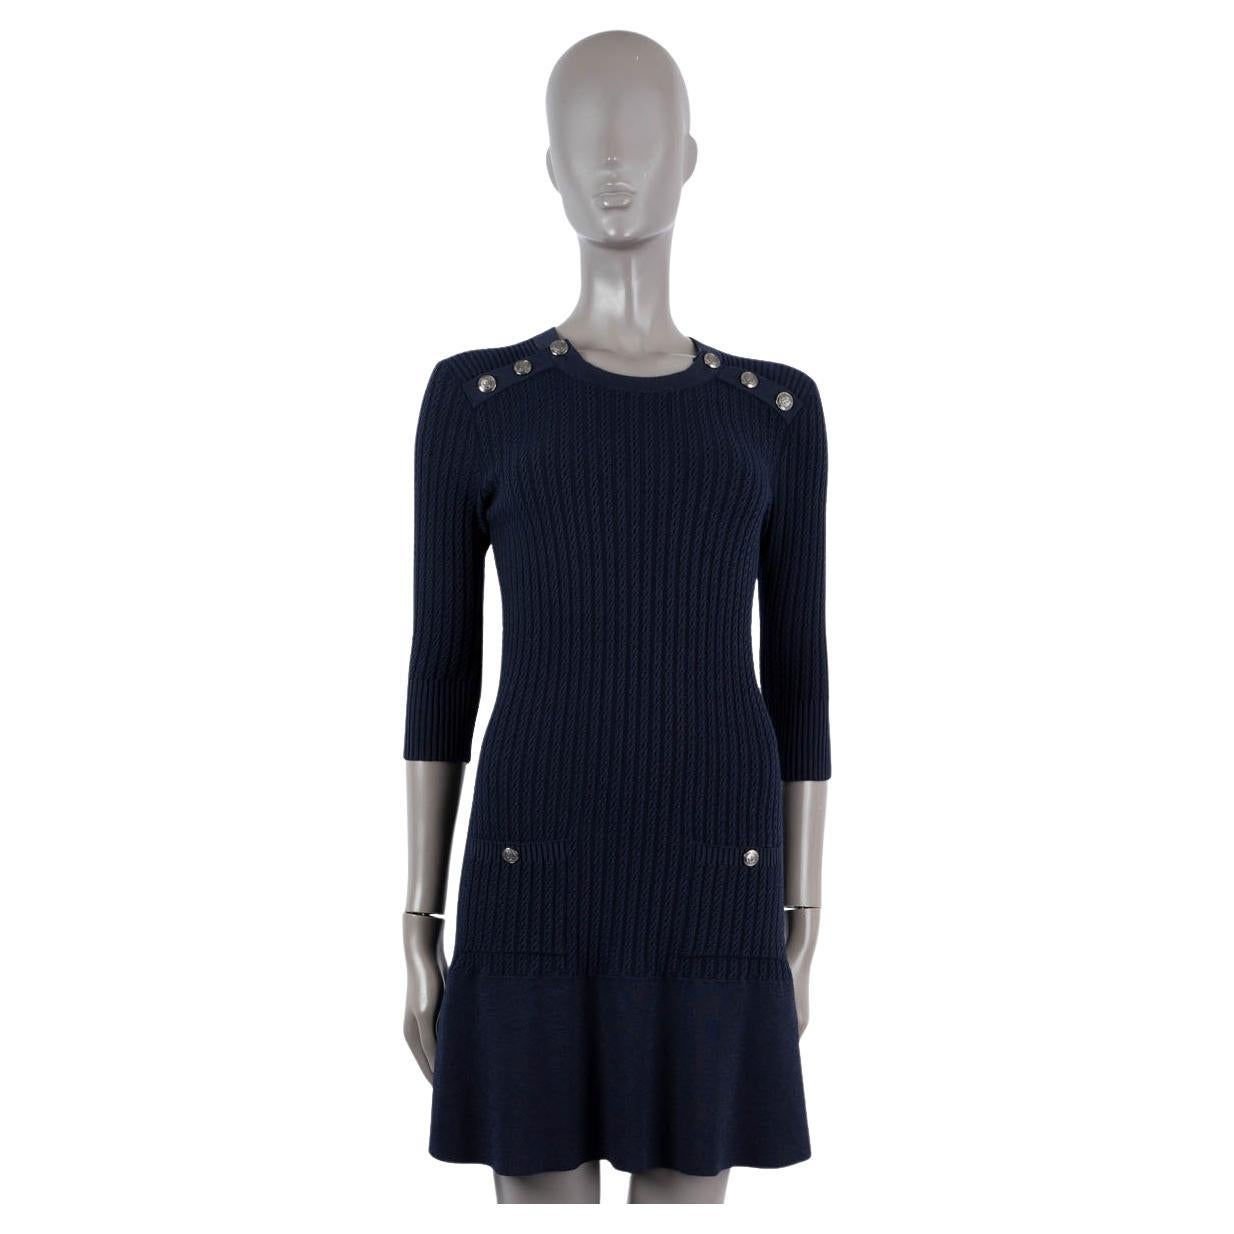 CHANEL navy blue cotton & wool 2018 18A HAMBURG BUTTONED NECK KNIT Dress 36 XS For Sale